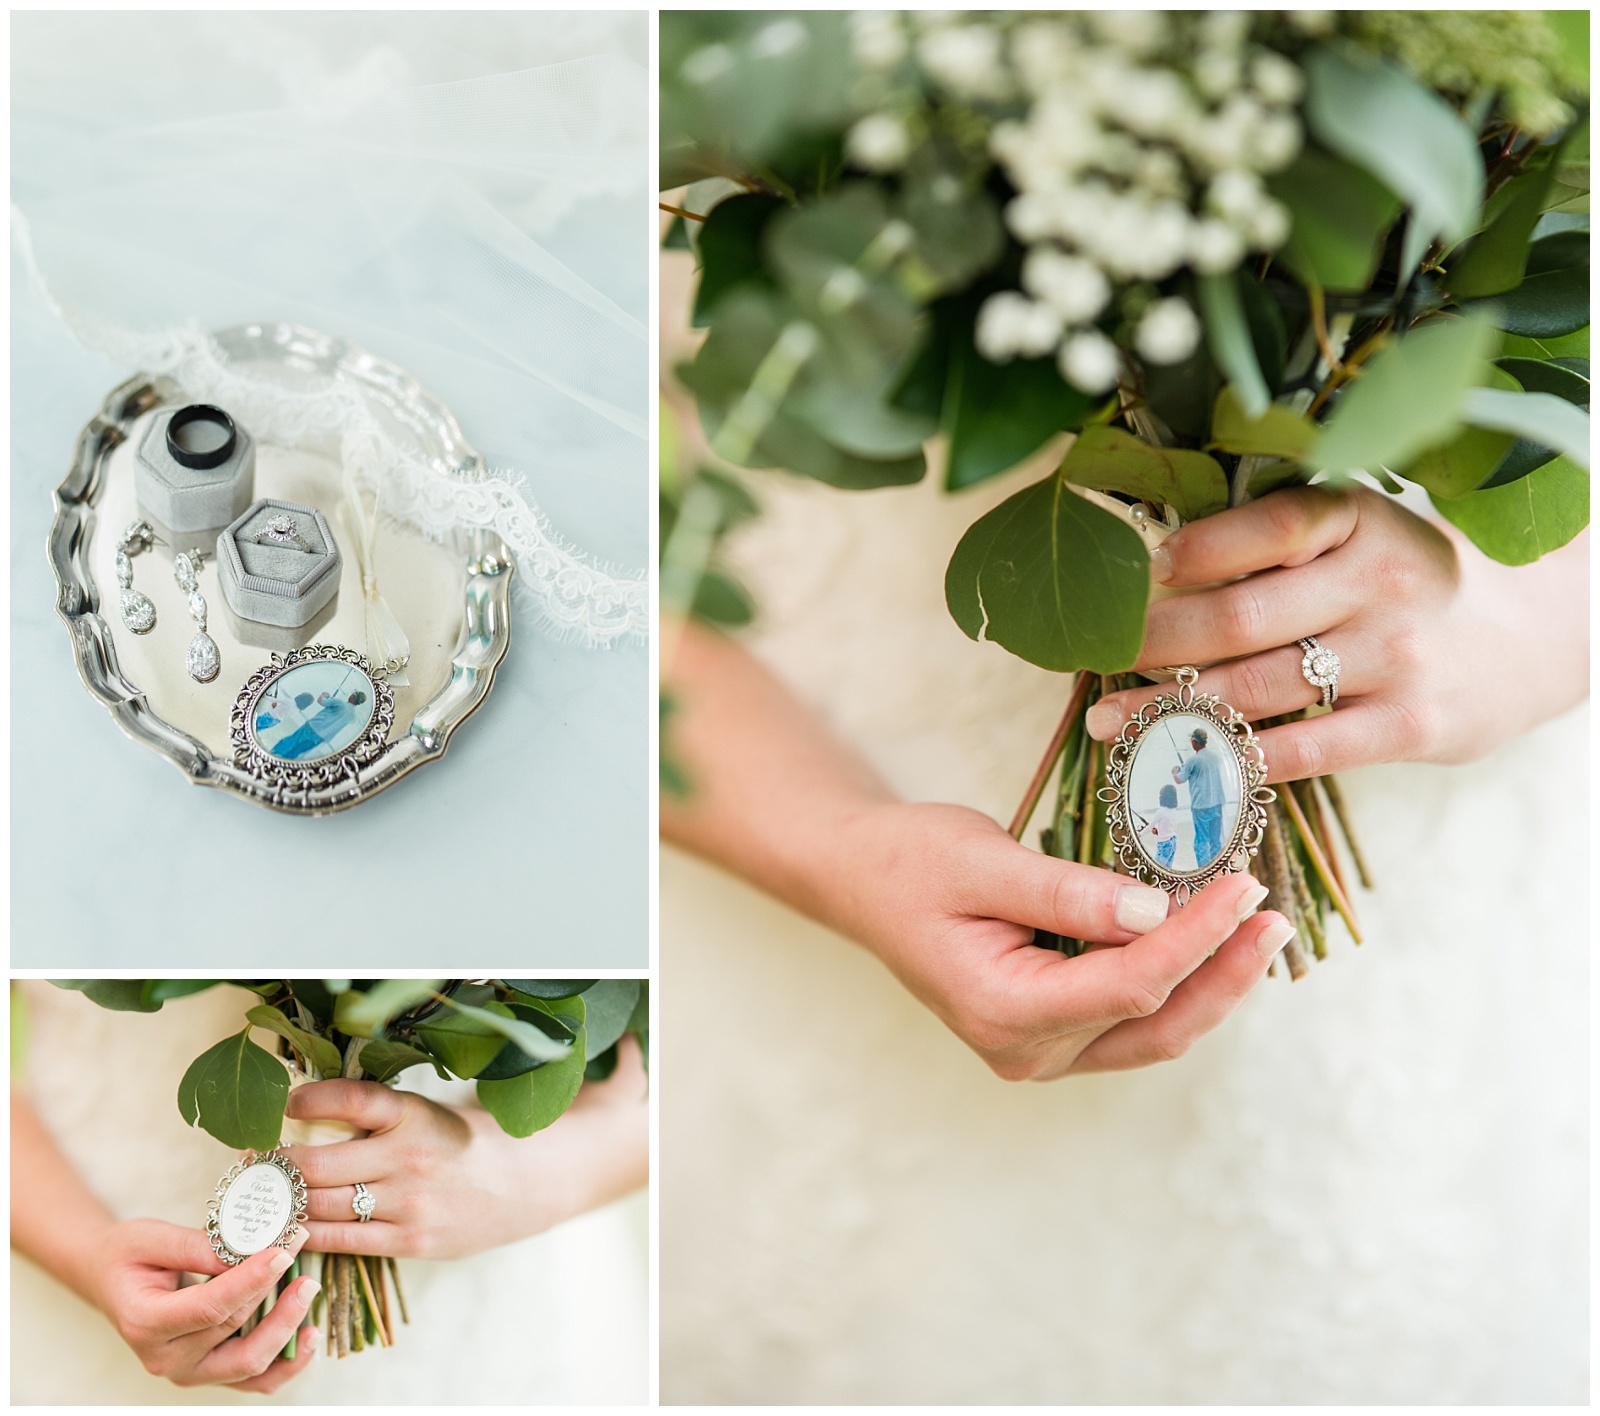 brooch charm with an image of grandmother pinned to bridal bouquet and photographed with wedding details, a special way to honor loved ones